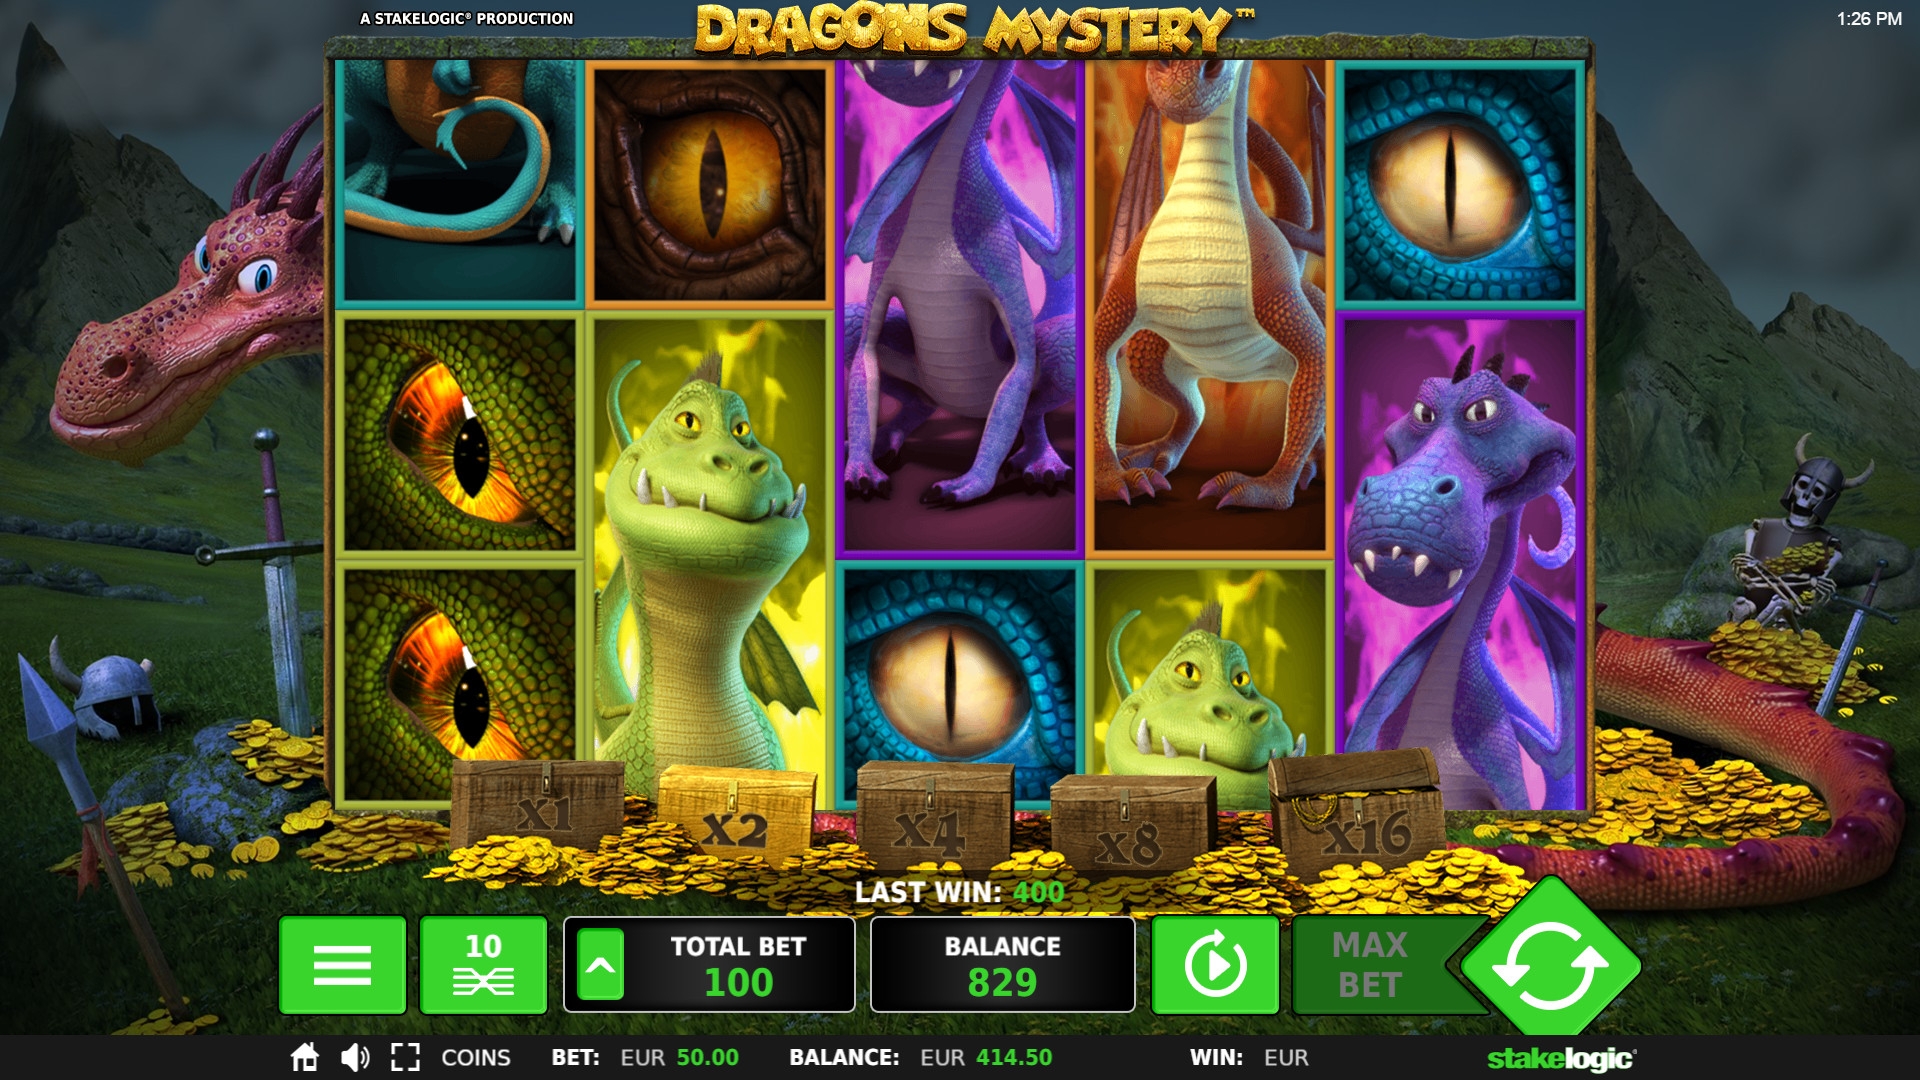 Dragons Mystery (Dragons Mystery) from category Slots